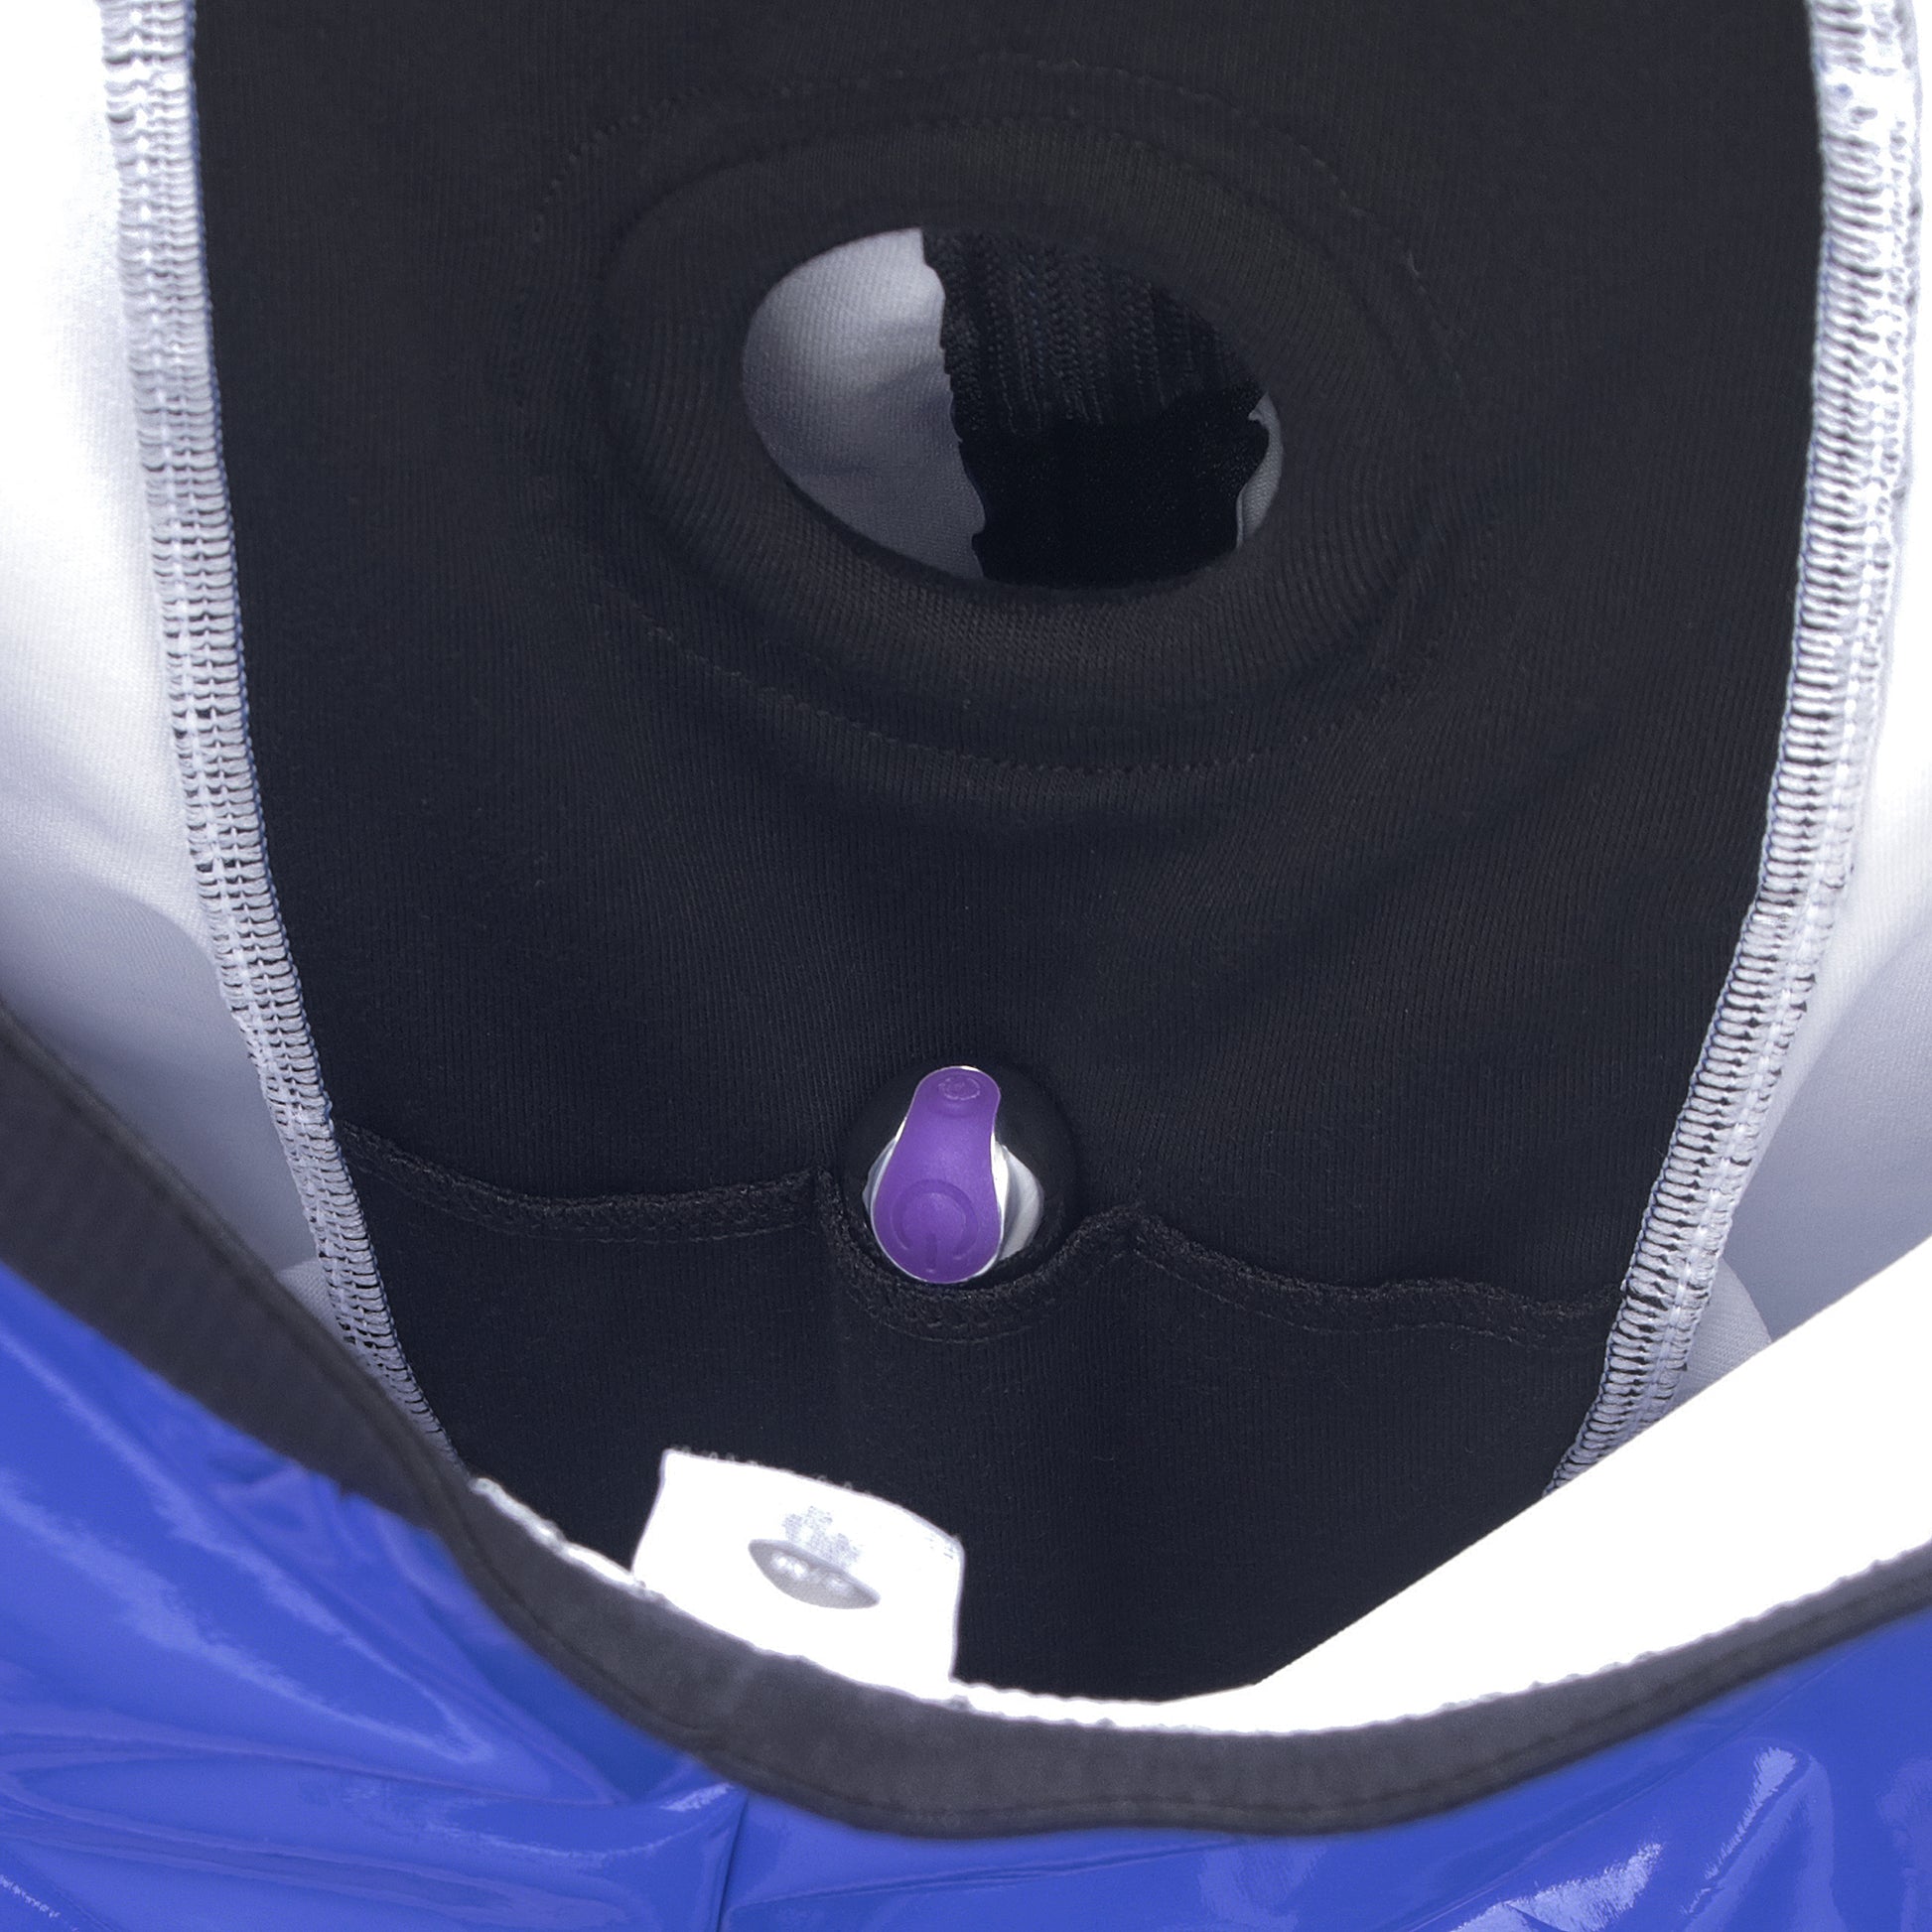 The mini vibrator is put in a hidden pocket at the bottom of the blue faux leather strap on shorts